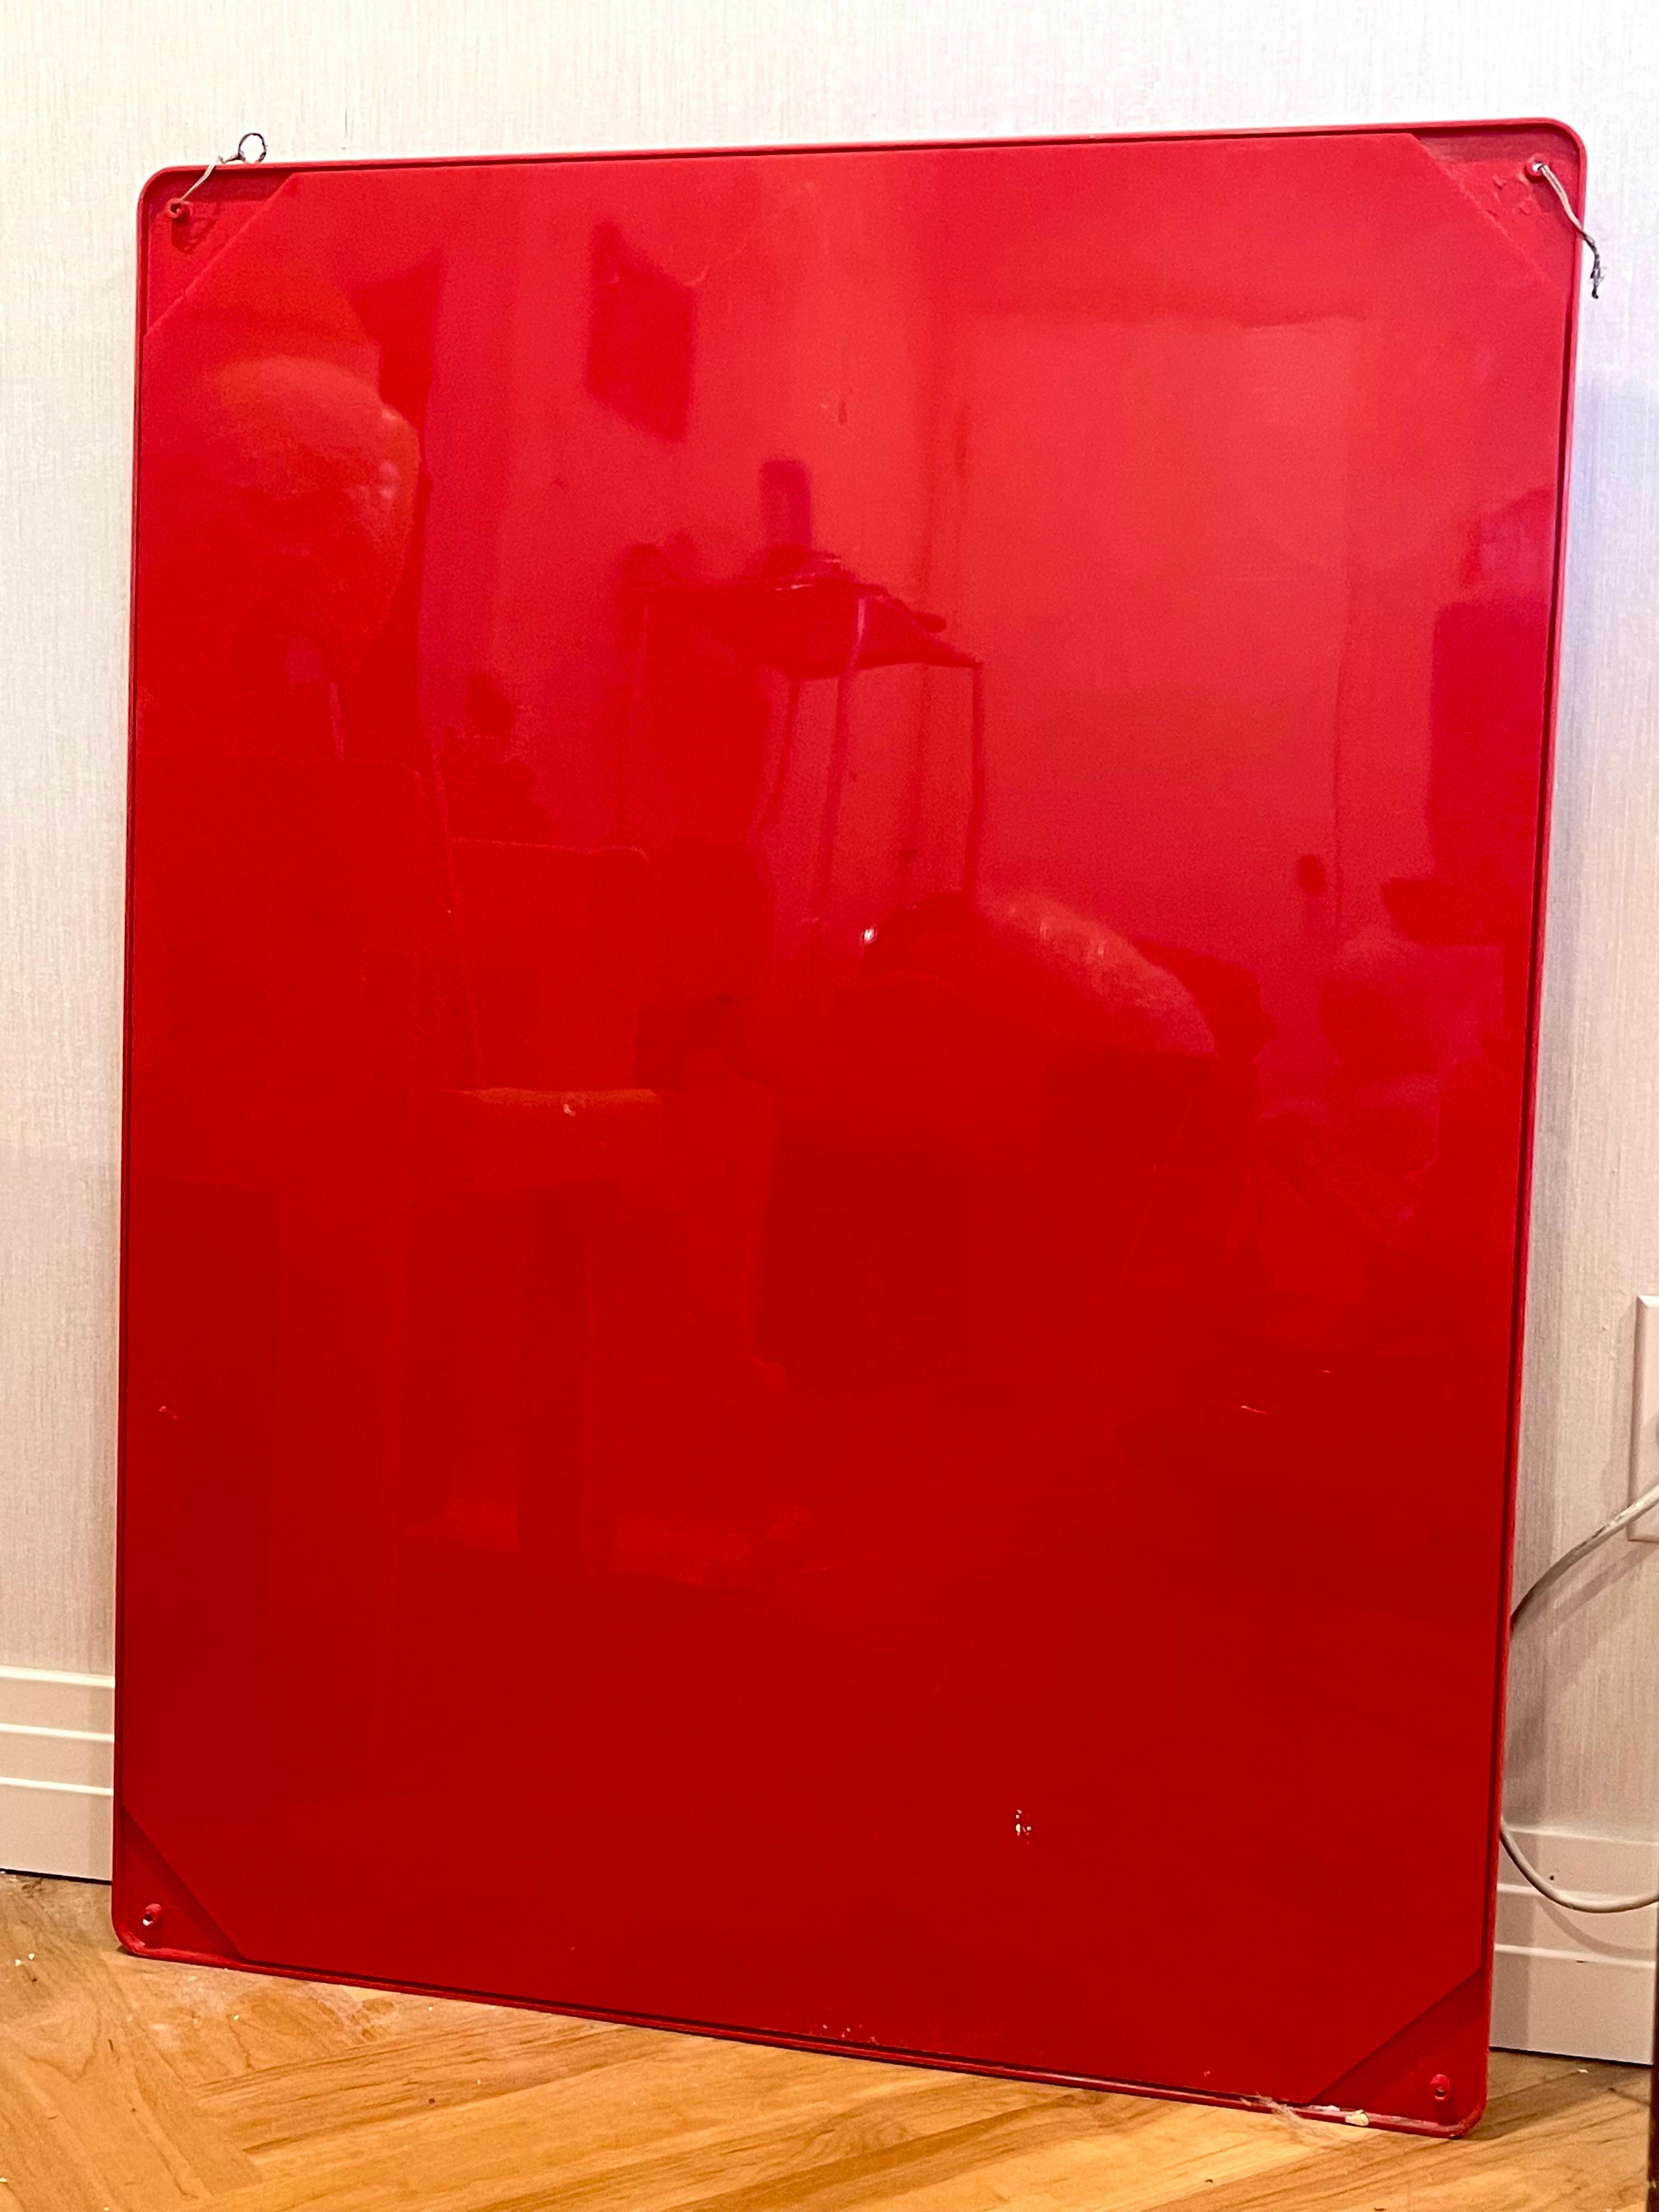 Large Uten.Silo wall organizer in bright red molded plastic originally designed by Dorothee Becker-Maurer for her husband Ingo’s company M Design, Germany 1969. 

Endless applications featuring a variety of size and shapes for organizing and